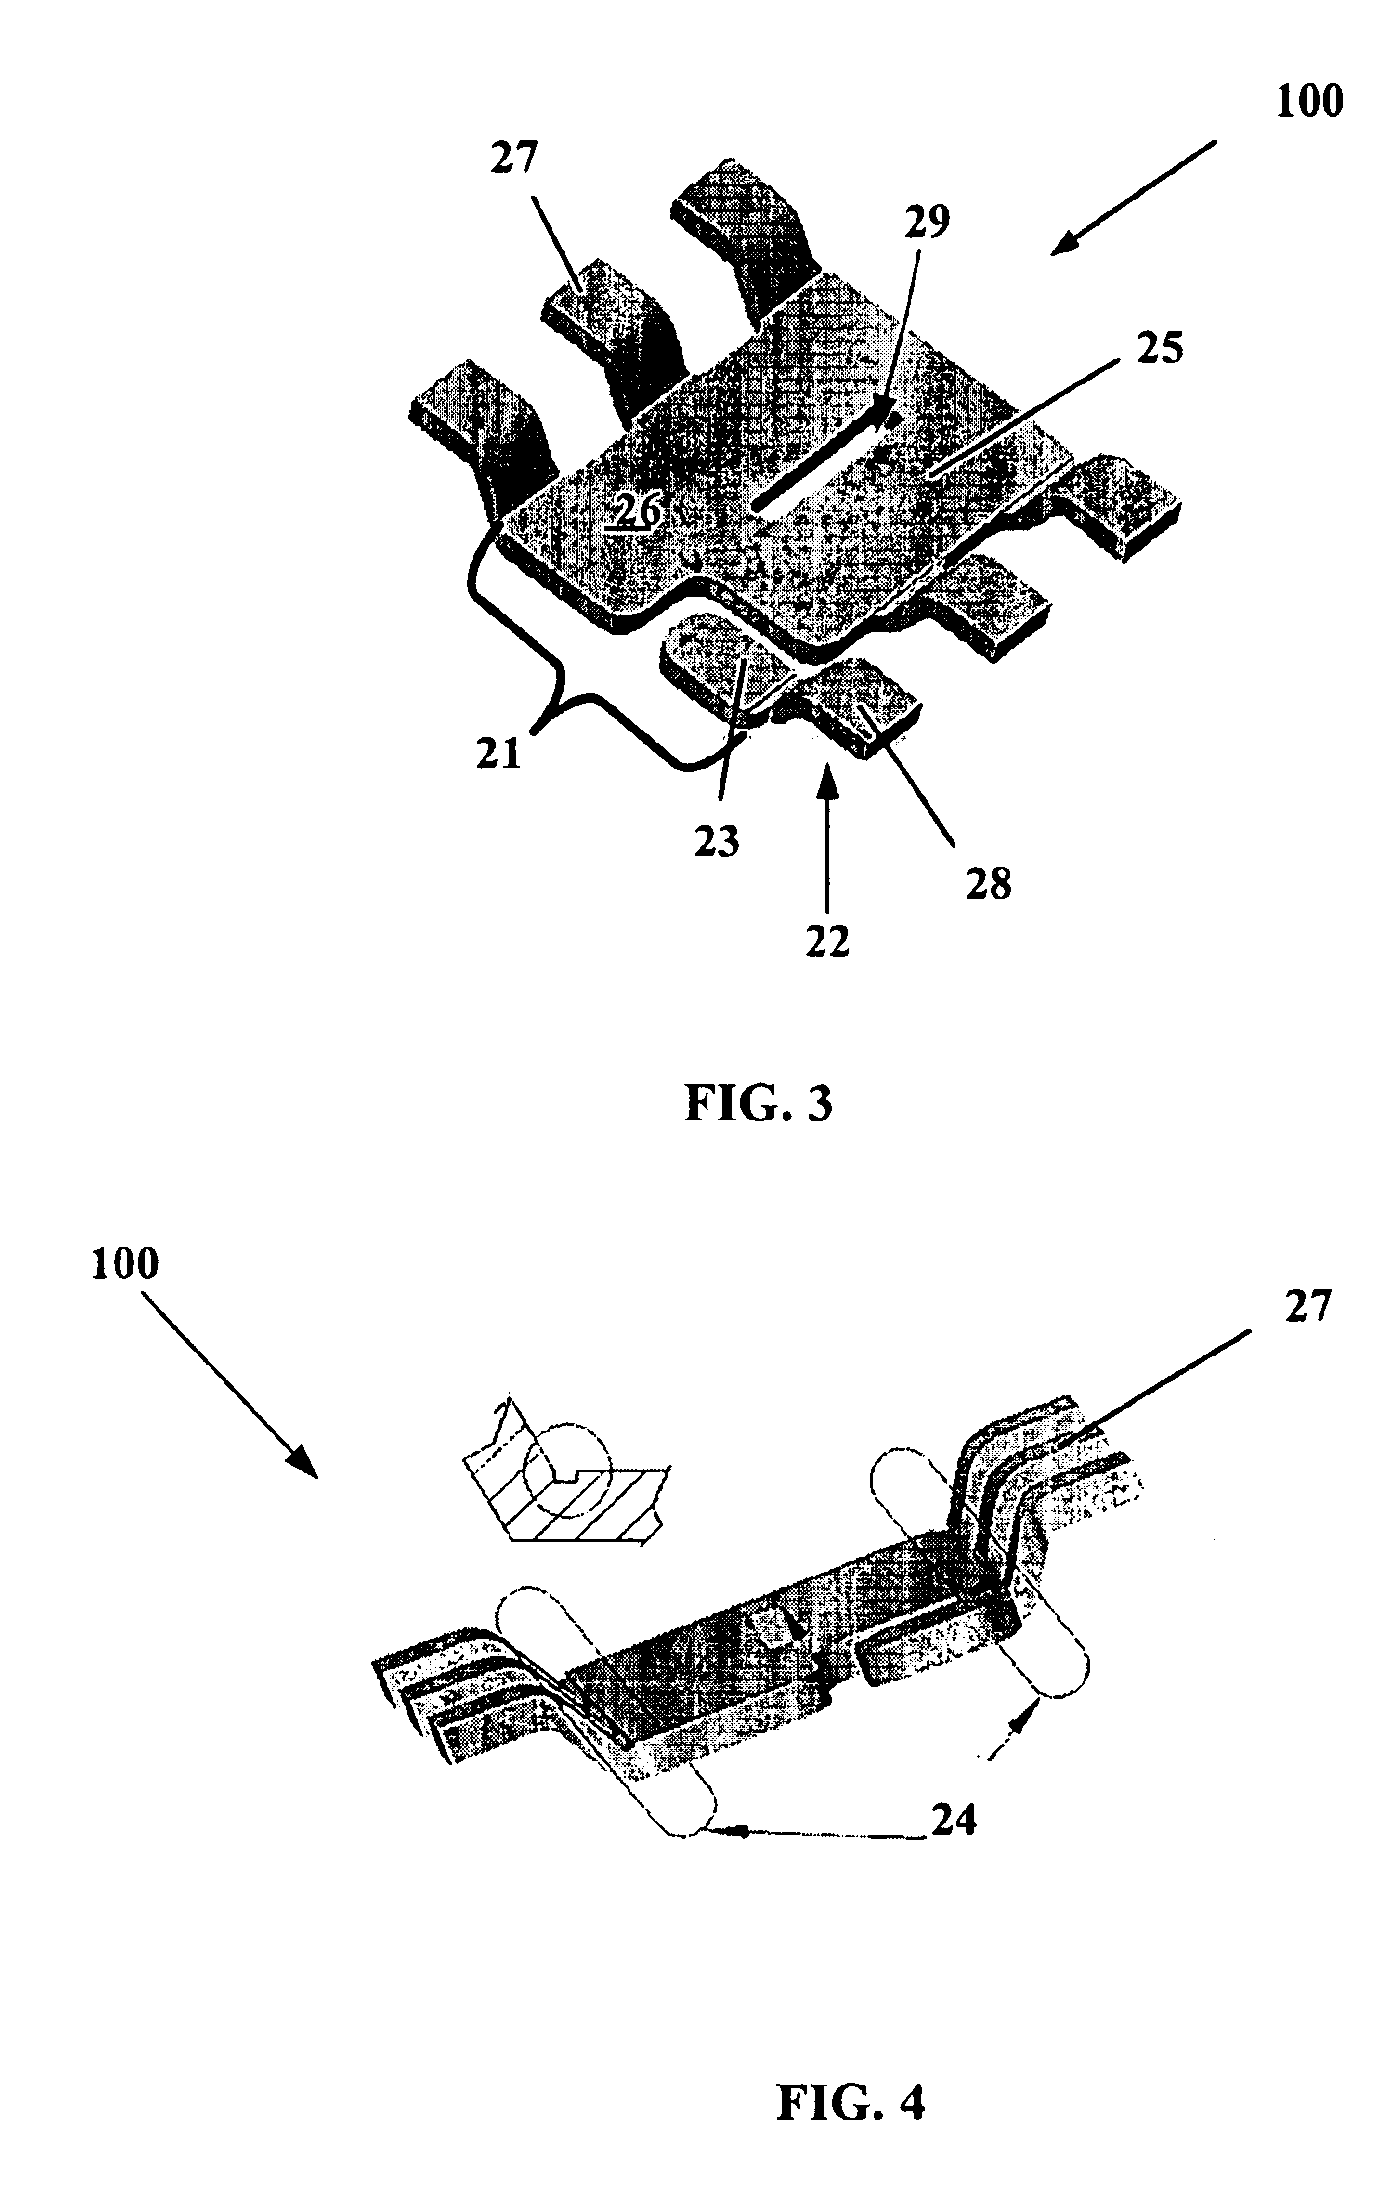 Method for maintaining solder thickness in flipchip attach packaging processes